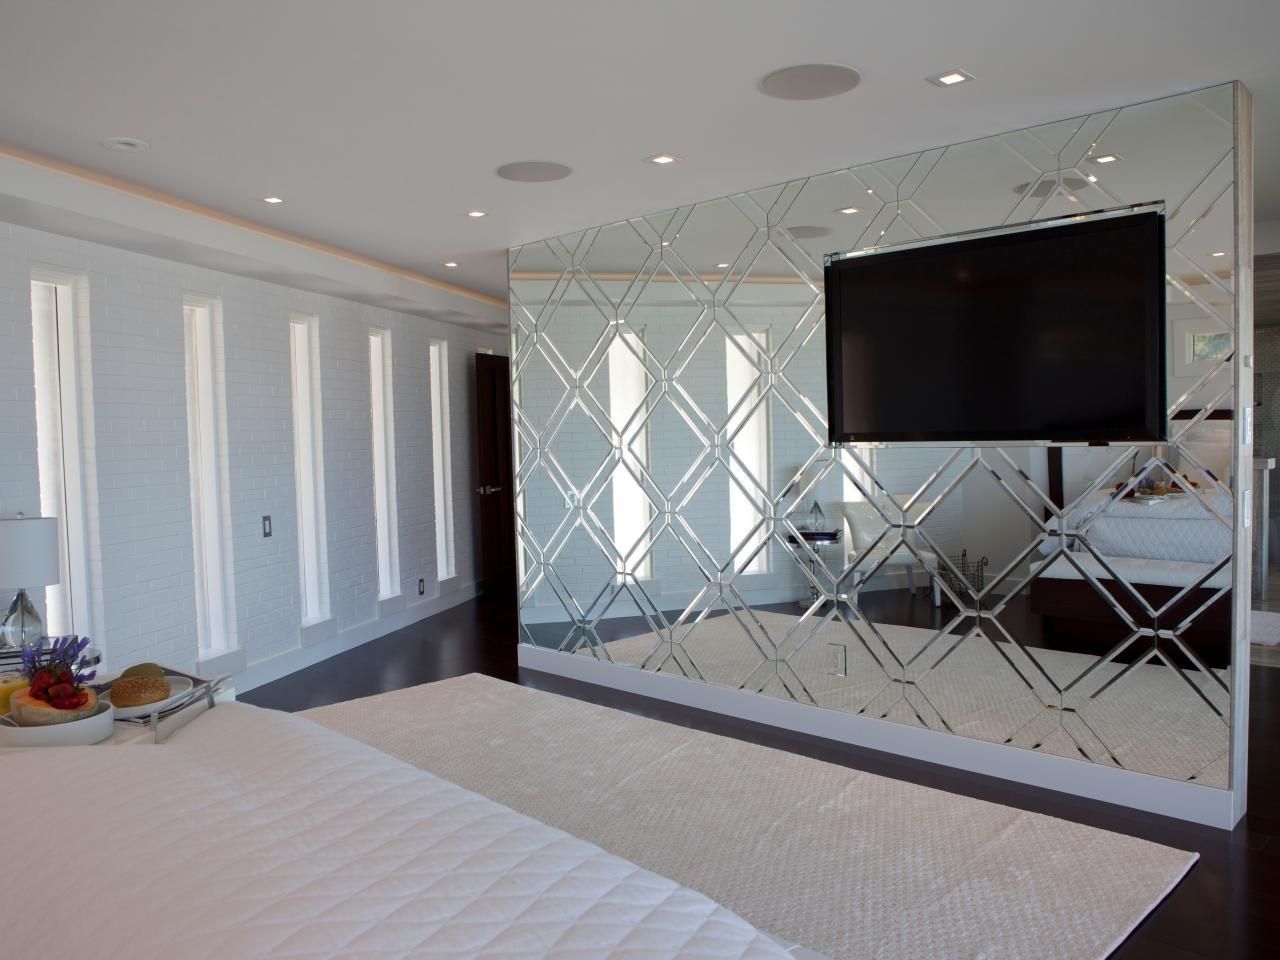 Perfect Decoration Bedroom Wall Mirrors Lofty Ideas Wall Mirrors Pertaining To Modern Bedroom Mirrors (View 13 of 20)